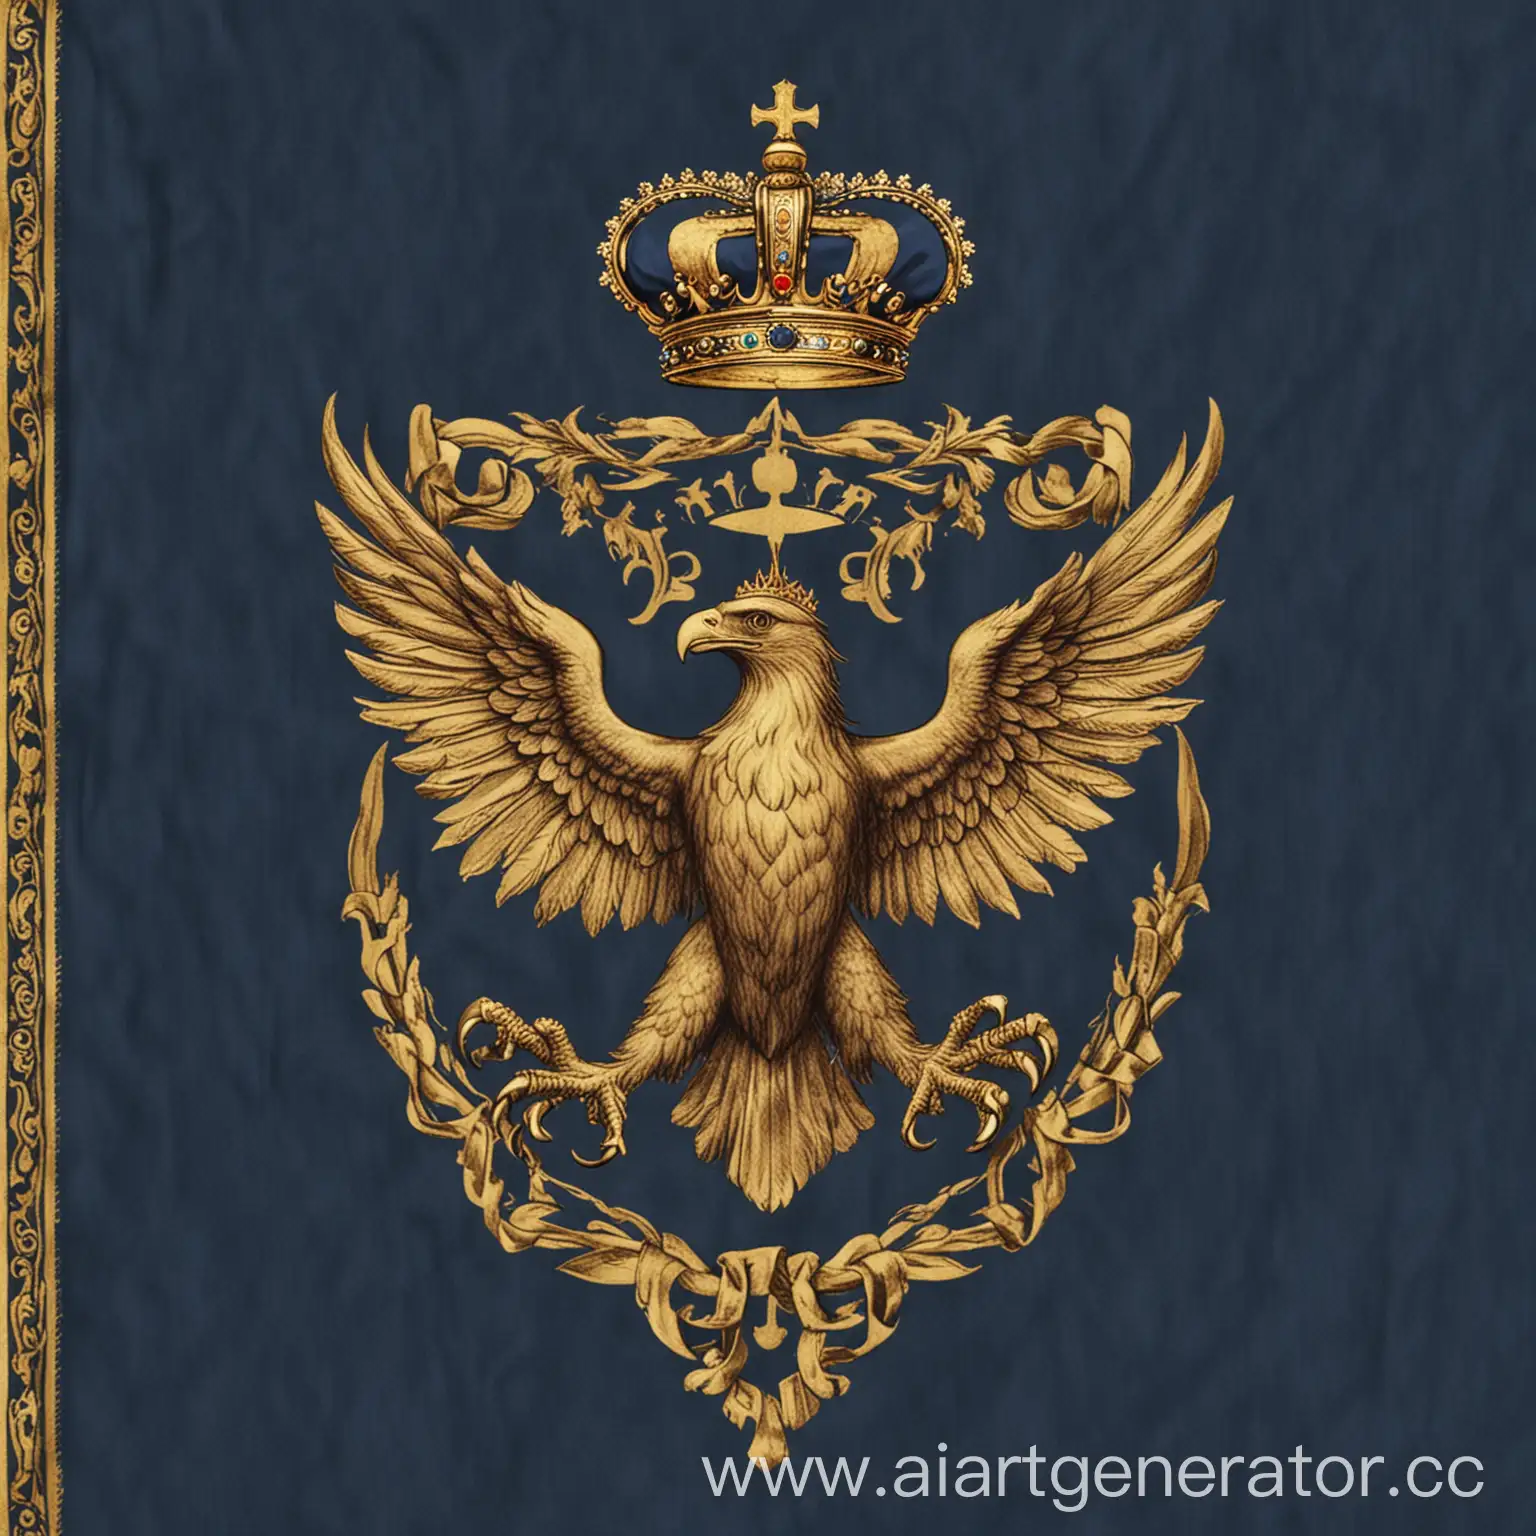 Flag-of-Avalon-Blue-Banner-with-Golden-Crown-and-Eagles